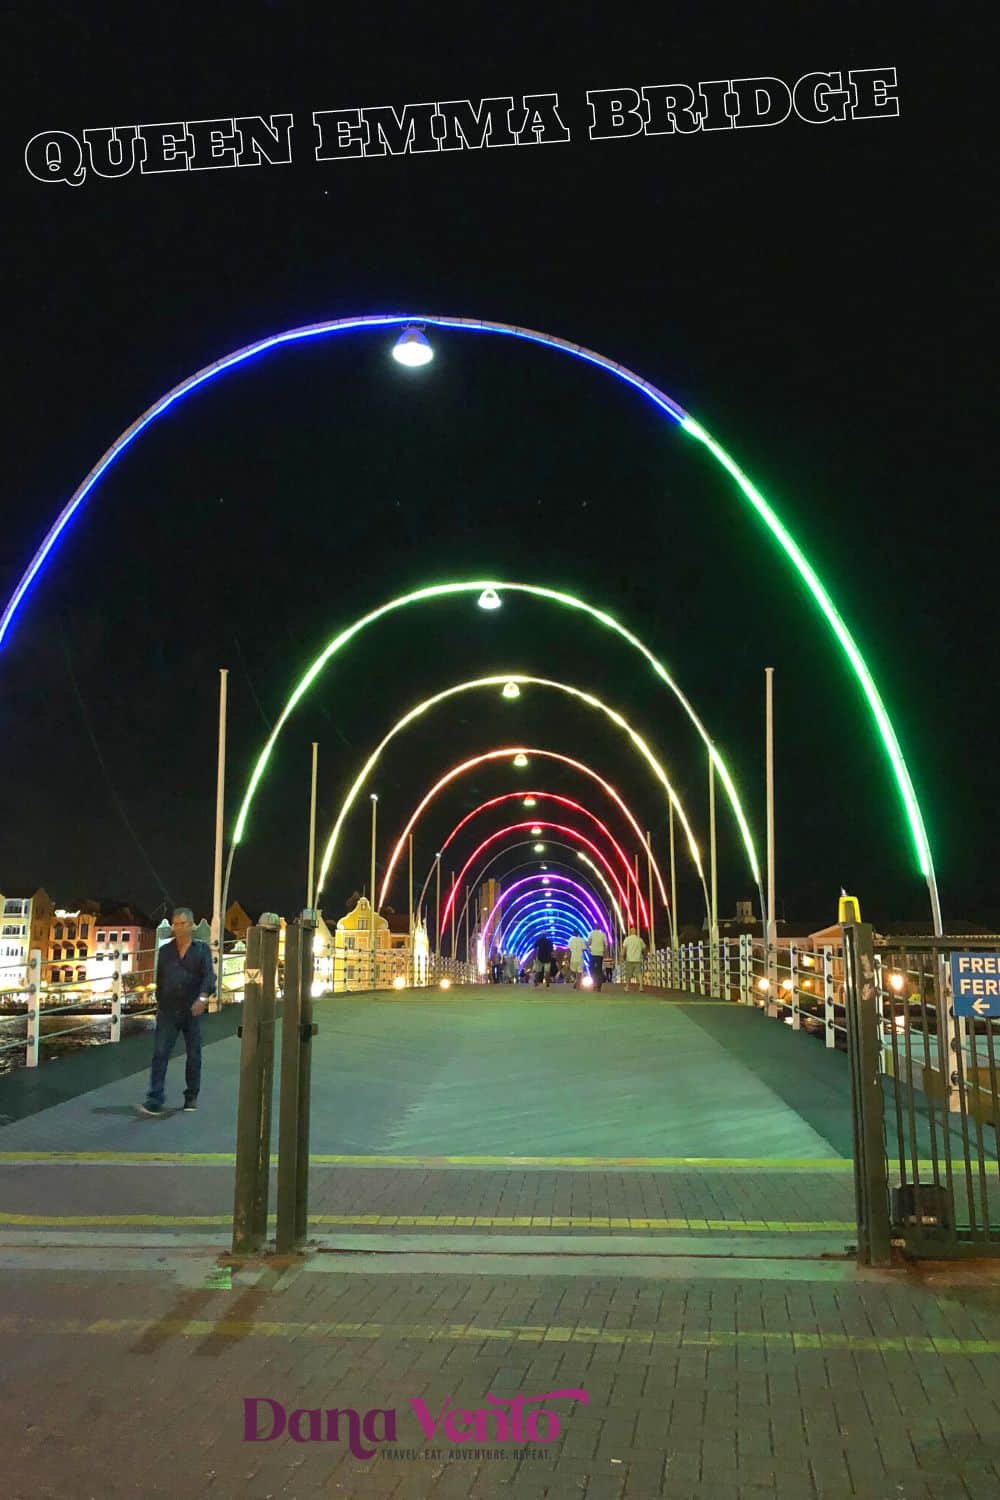 Discover Willemstad Curacao on foot -the swinging Queen Emma Bridge 